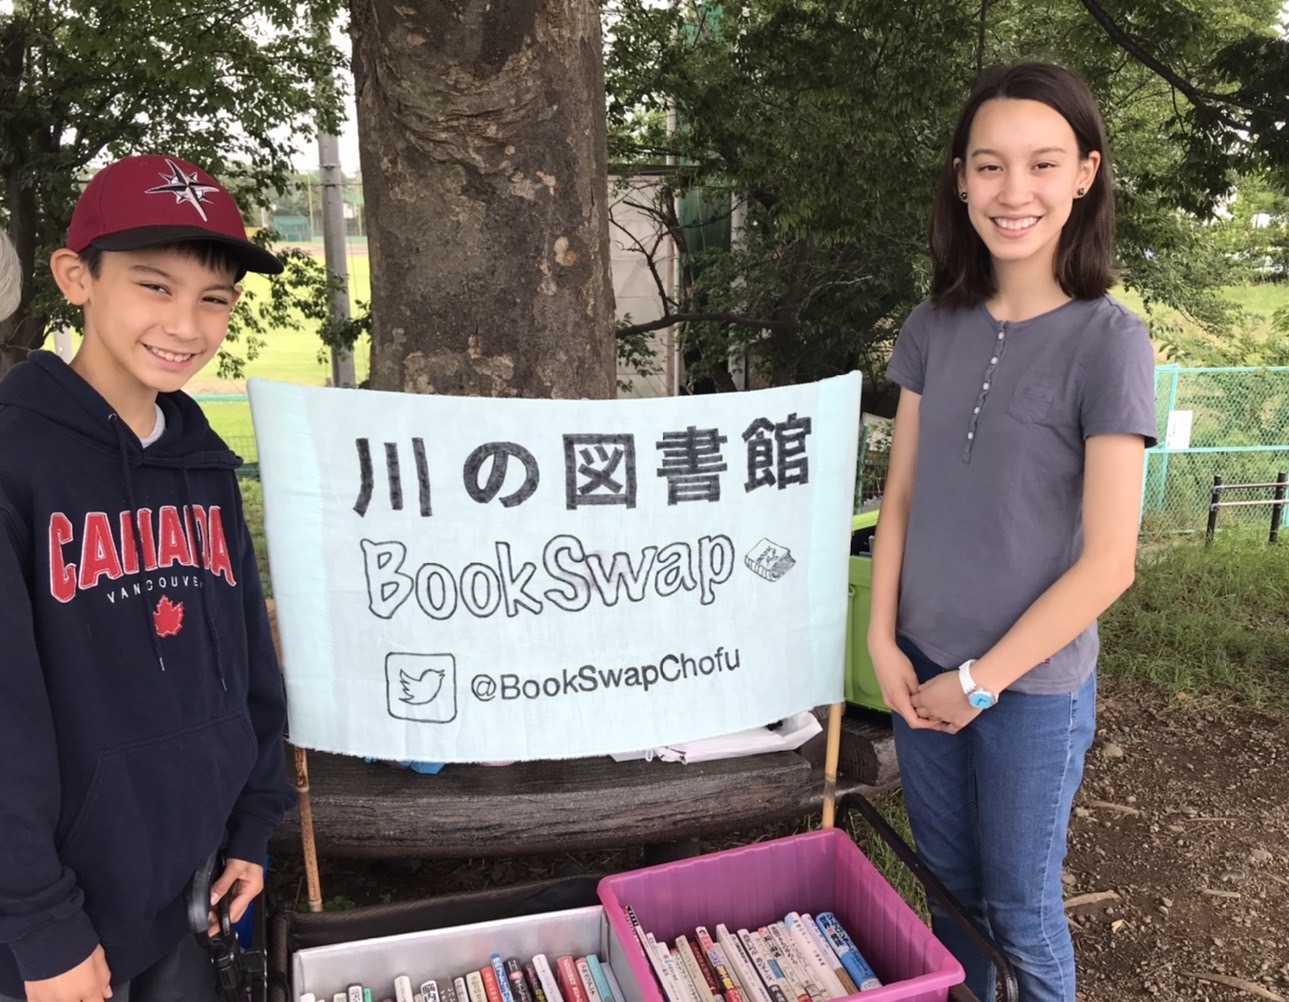 Tokyo Teenager Helps Neighbors During the Coronavirus Pandemic One Book at a Time